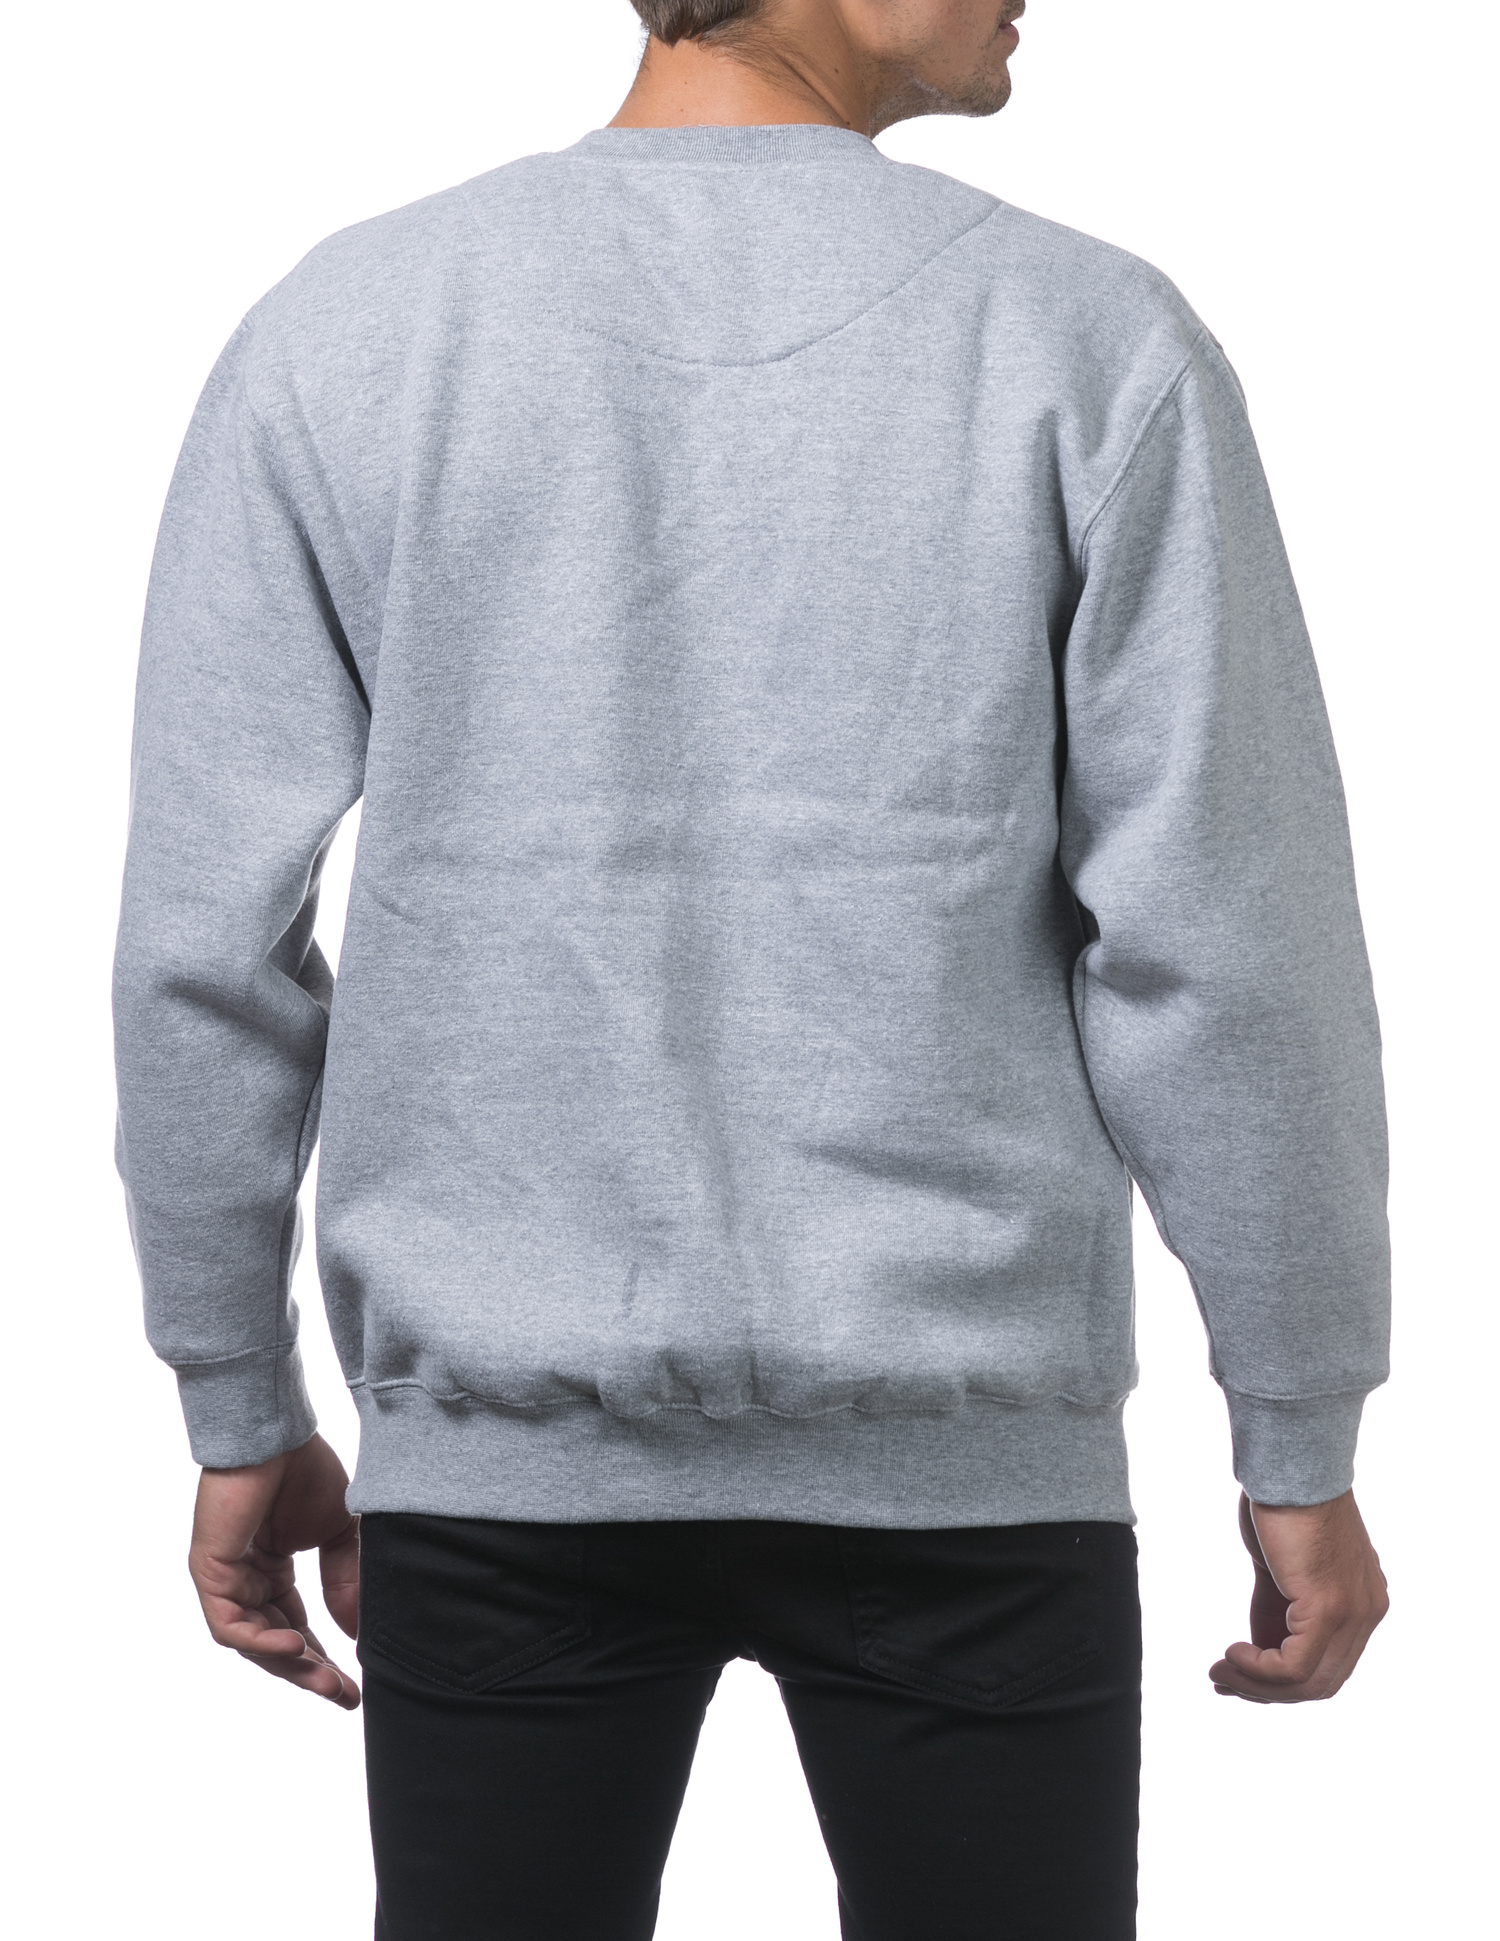 146 H.GRAY Heavyweight V-Neck Pullover Sweater - Sweaters